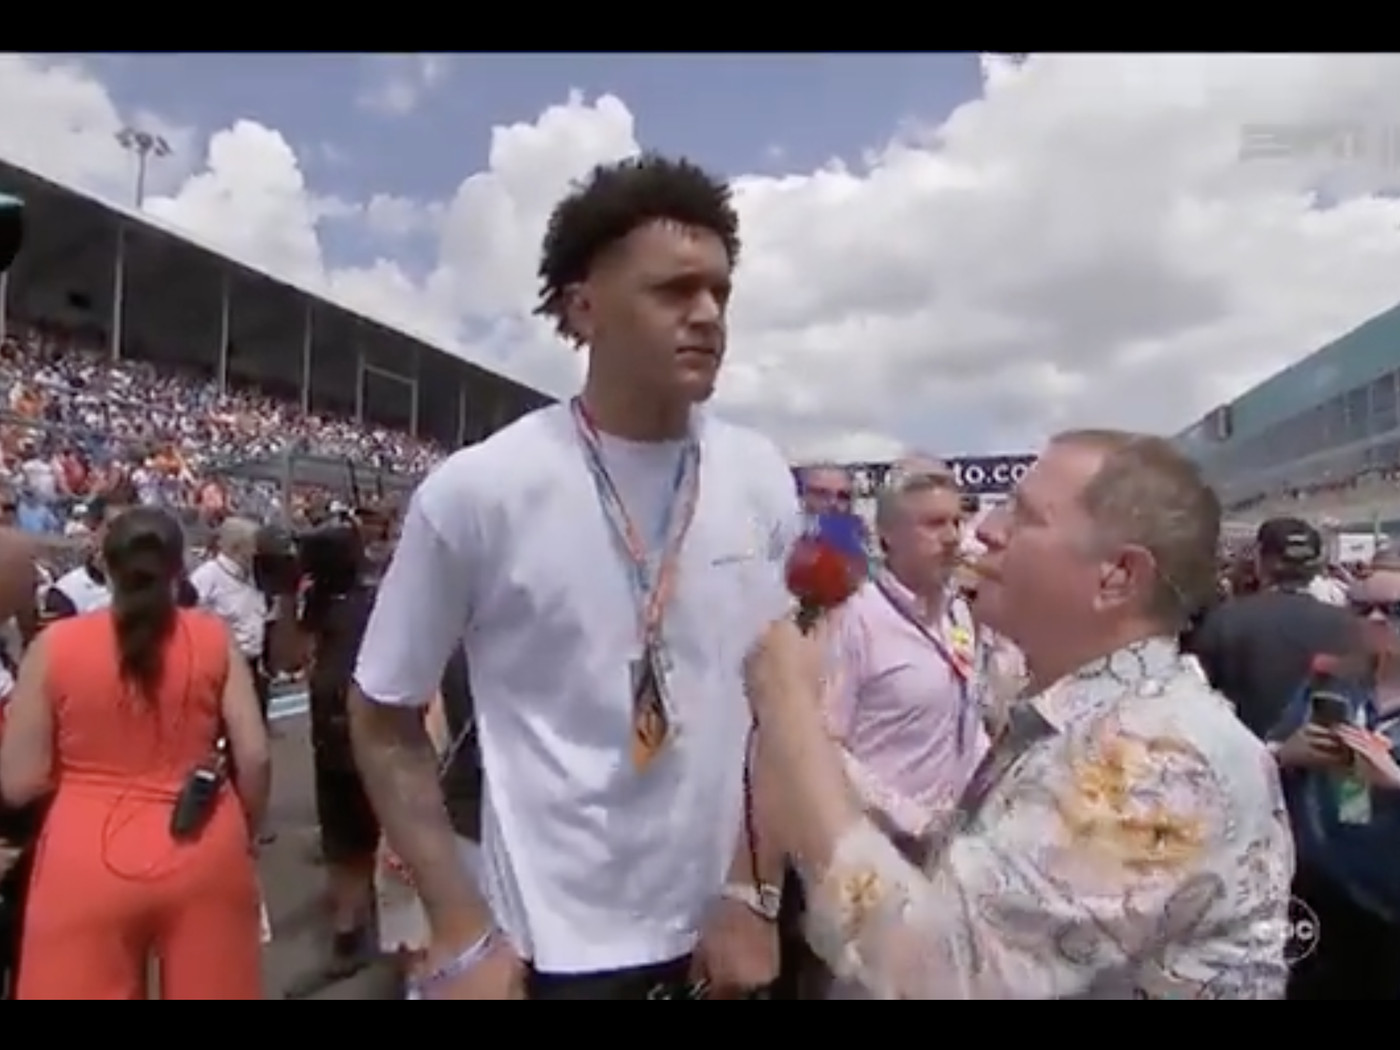 F1 announcer confused Paolo Banchero with Patrick Mahomes during interview